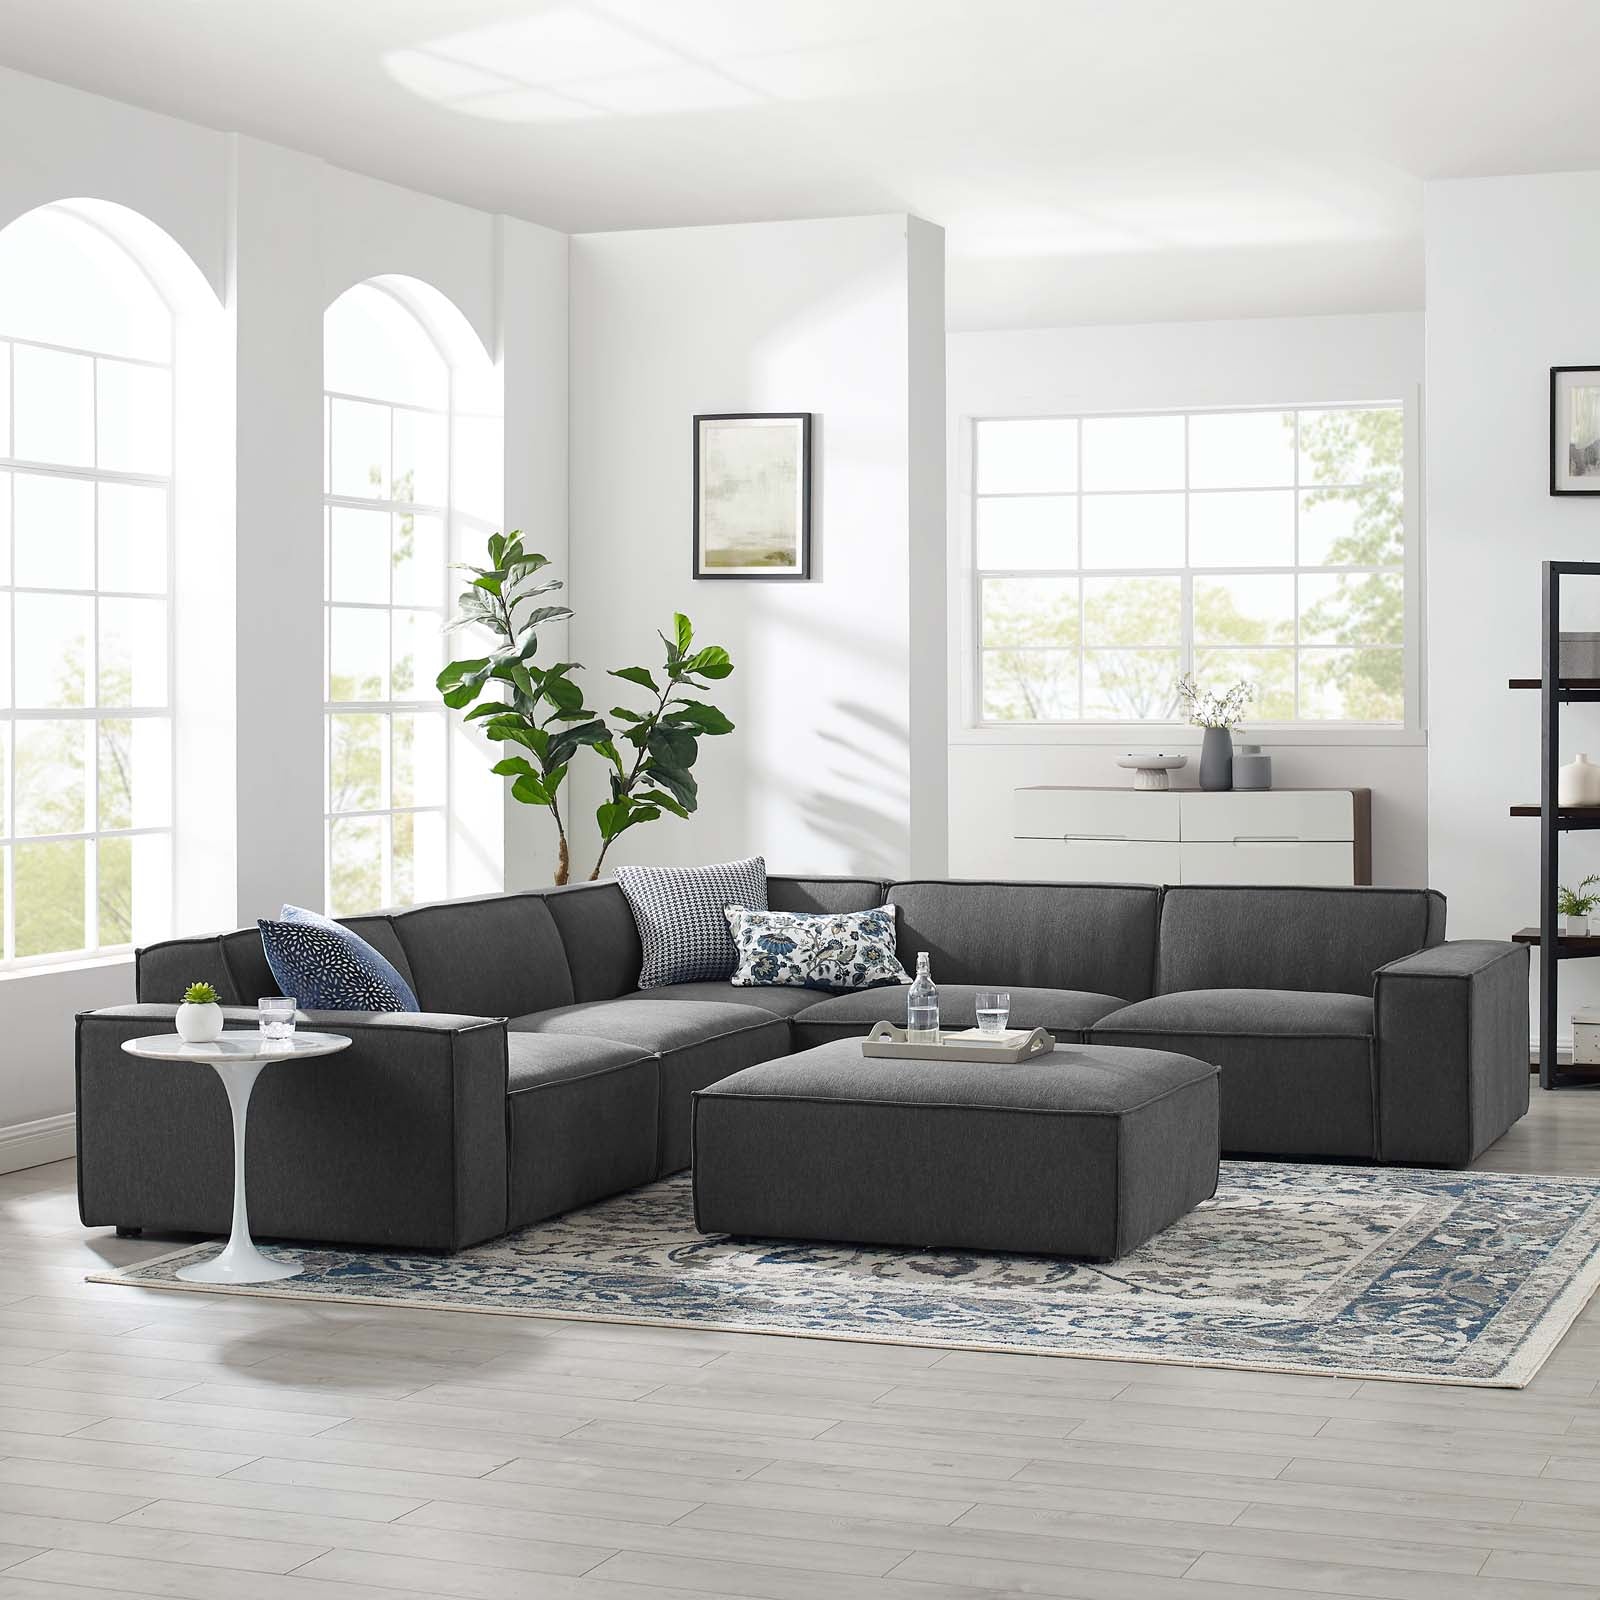 Modway Sectional Sofas - Restore 6-Piece Sectional Sofa Charcoal 122"